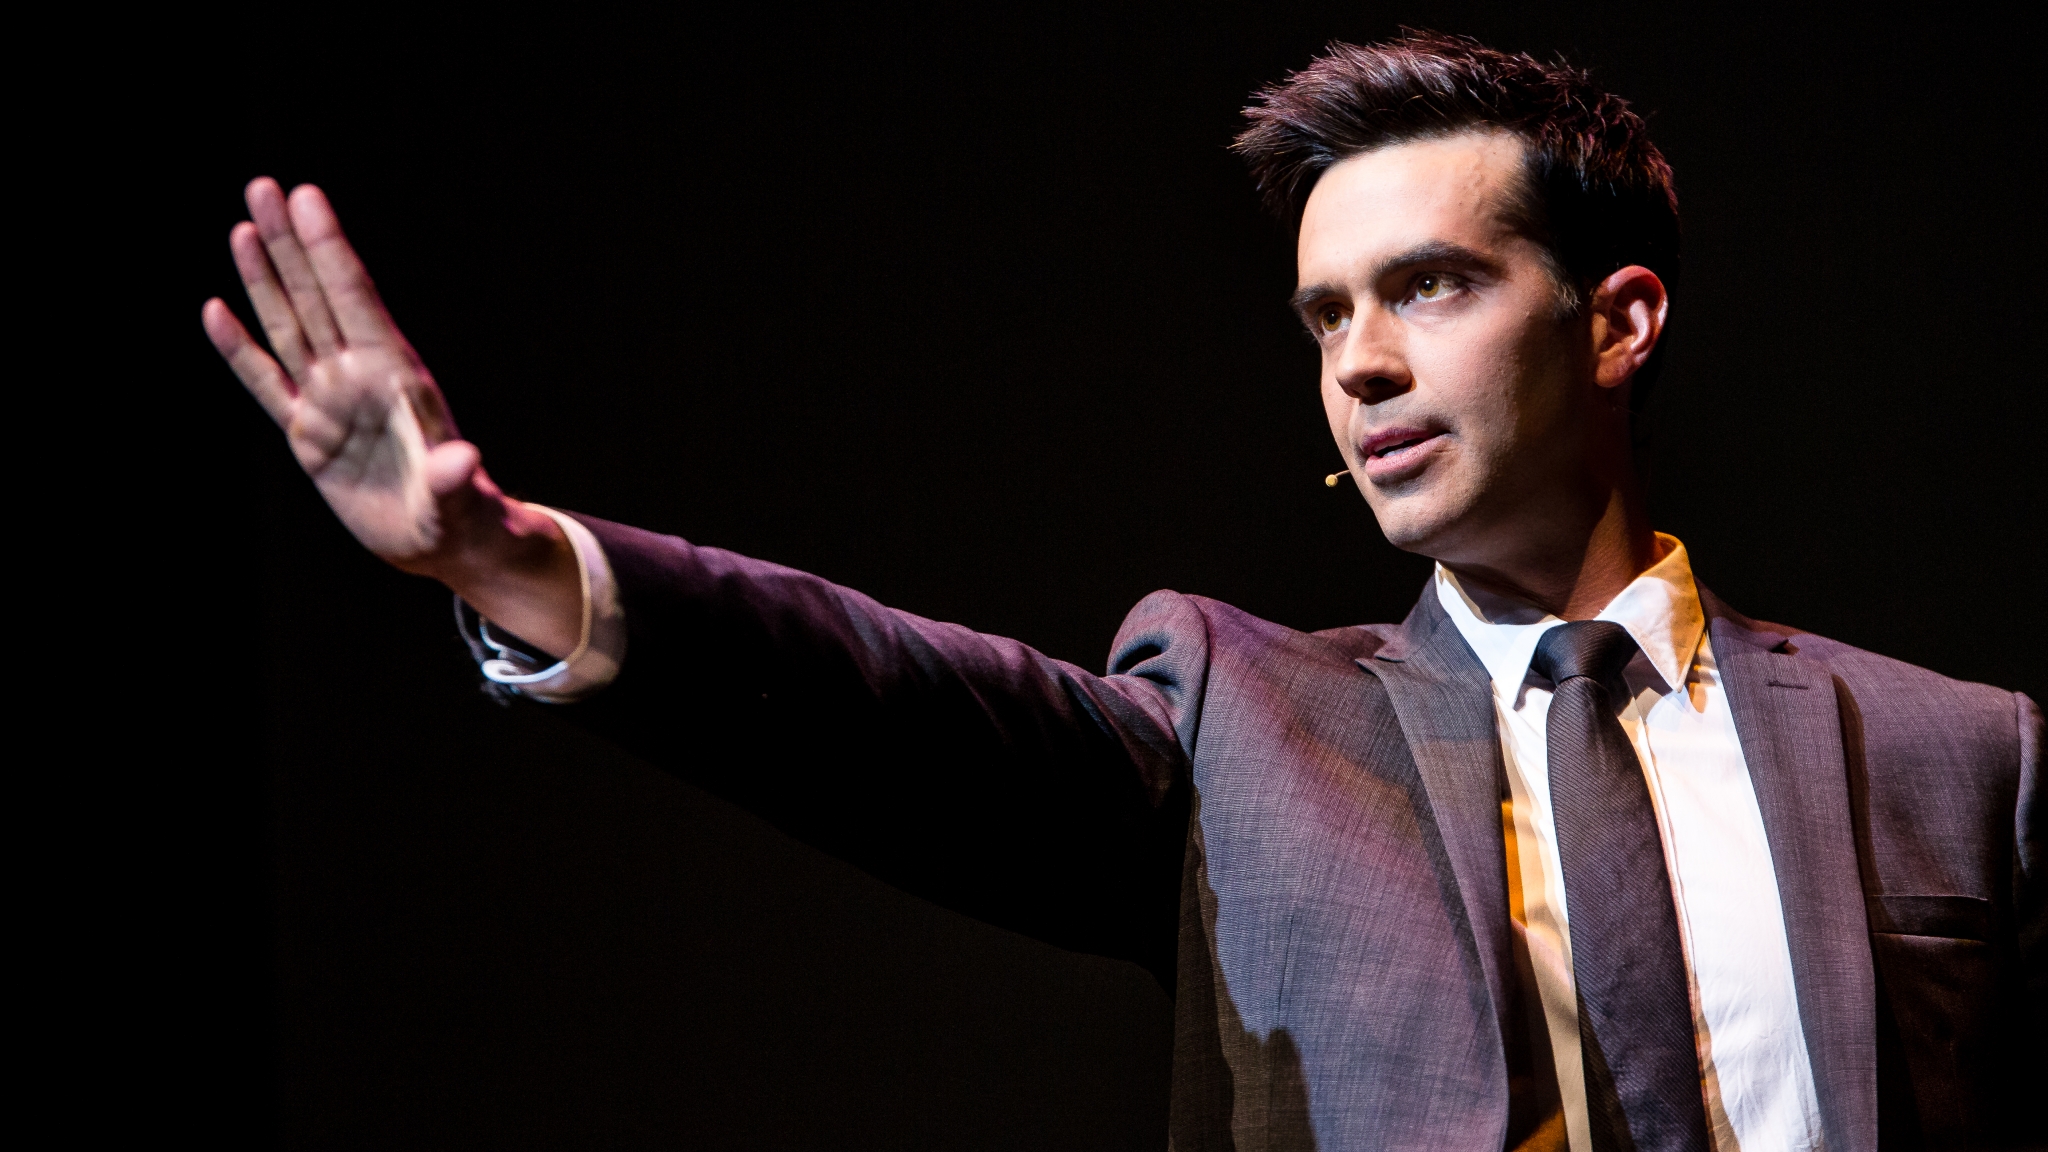 Finding magic in the everyday is what Michael Carbonaro does best -- partic...